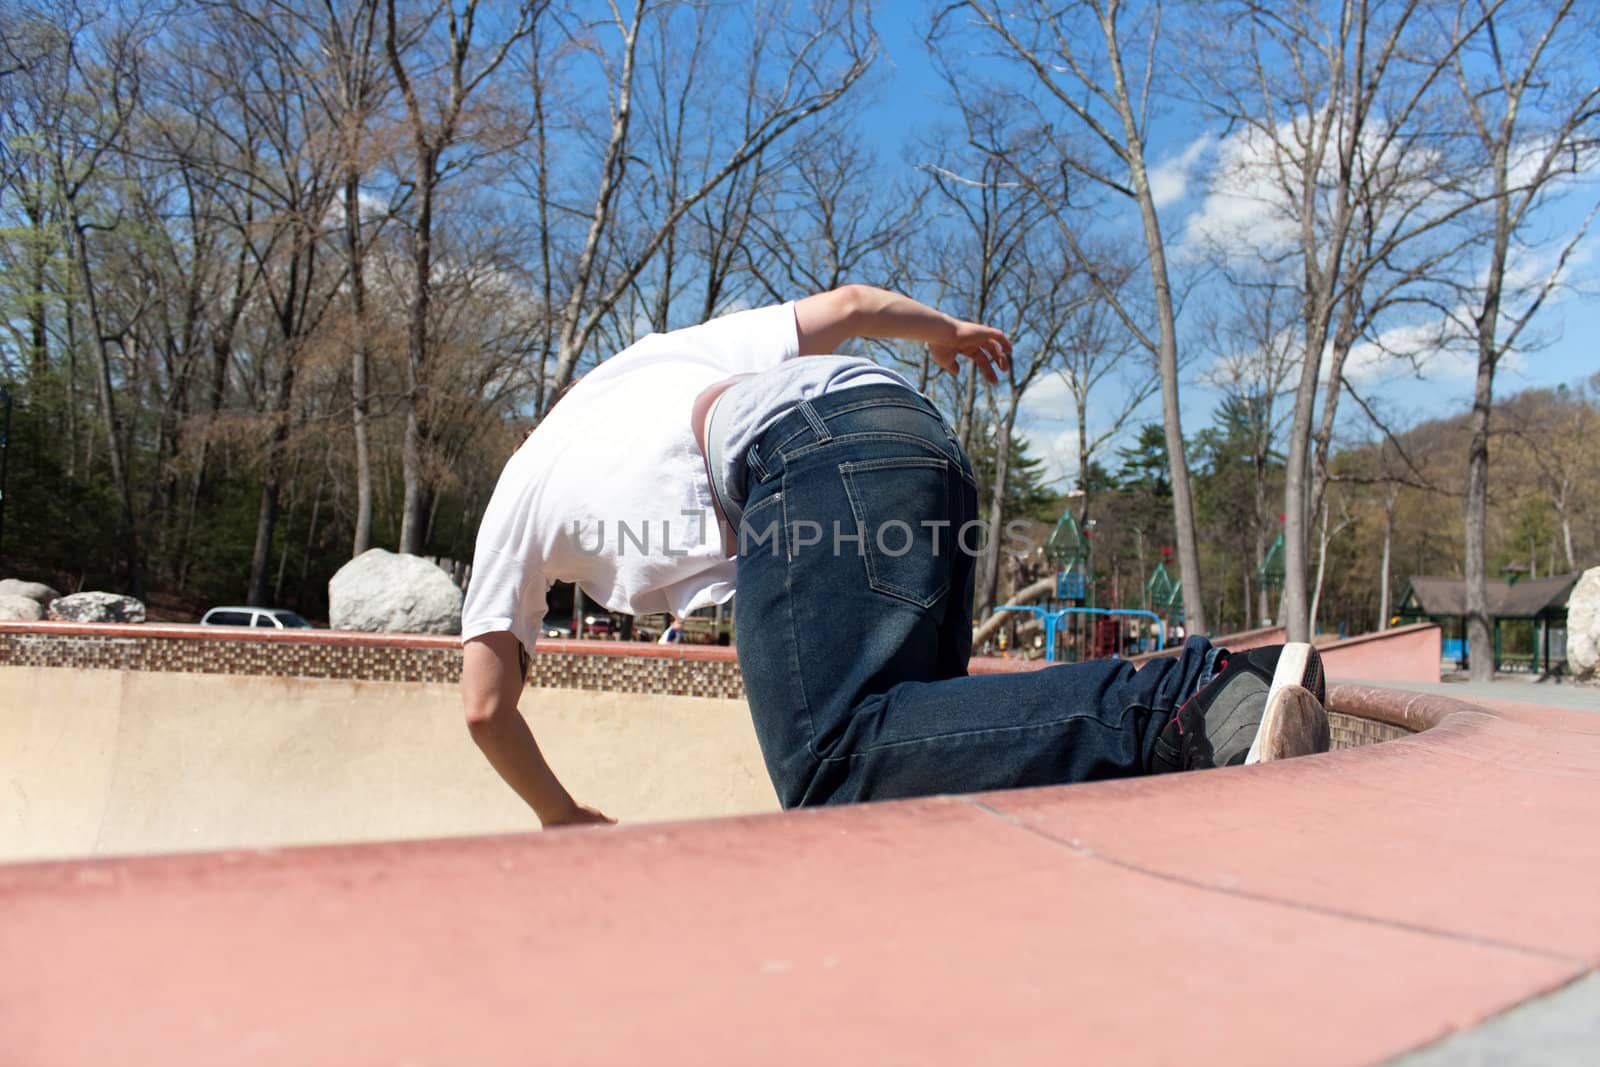 Action shot of a young skateboarder skating sideways against the wall of the bowl at a skate park.